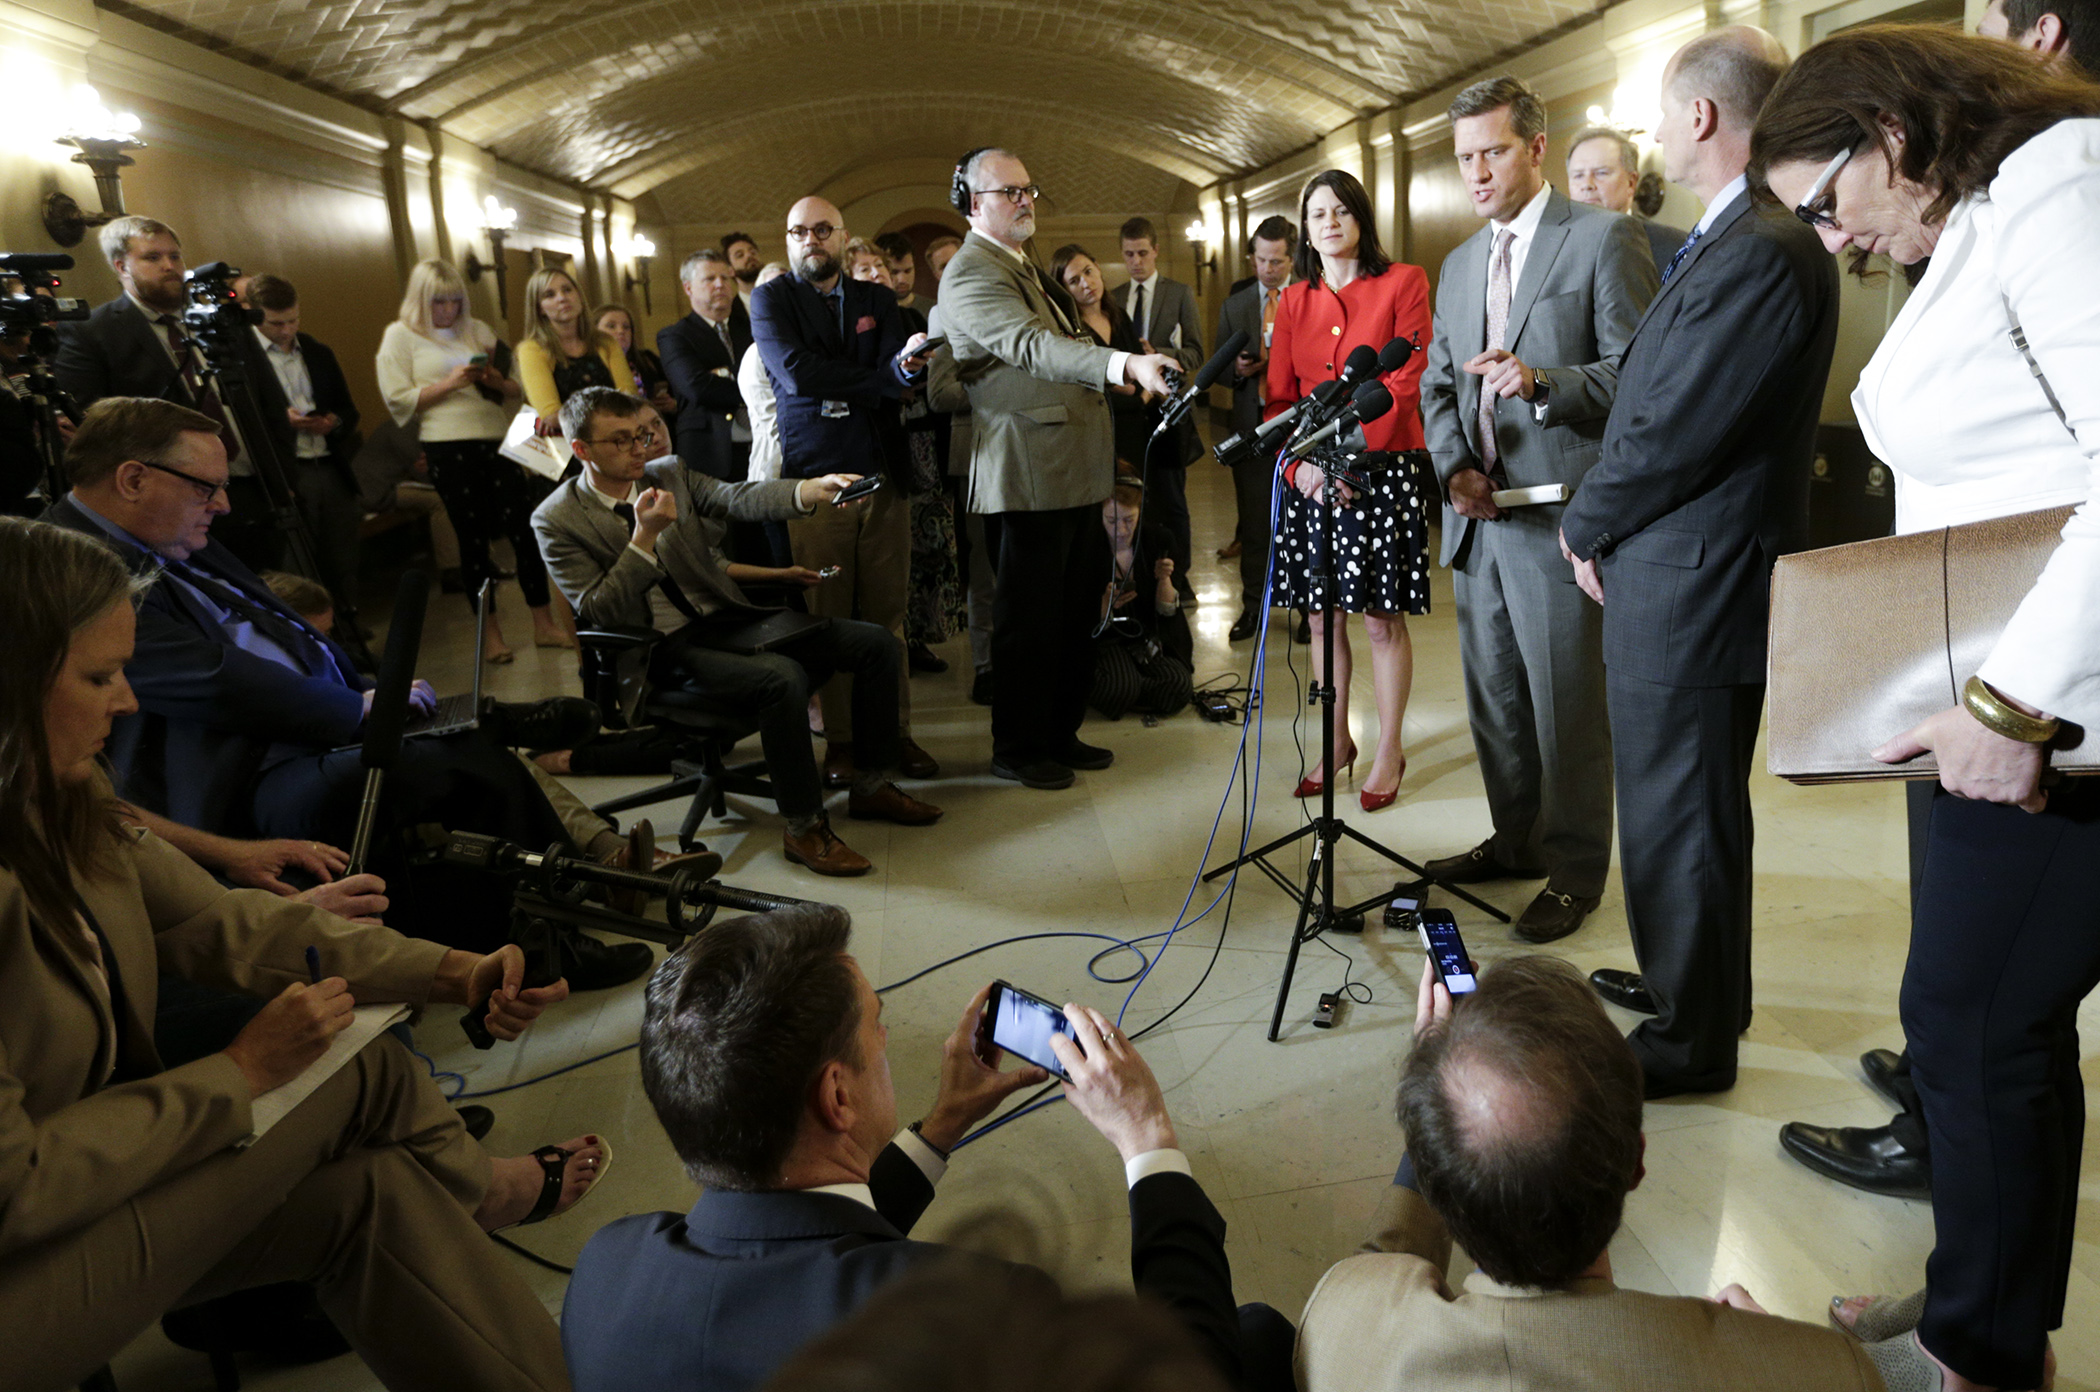 House Speaker Kurt Daudt talks with the media Saturday evening about negotiations with the governor. The House and Senate are expected to take up the conference committee report on the supplemental funding bill late Saturday night. Photo by Paul Battaglia